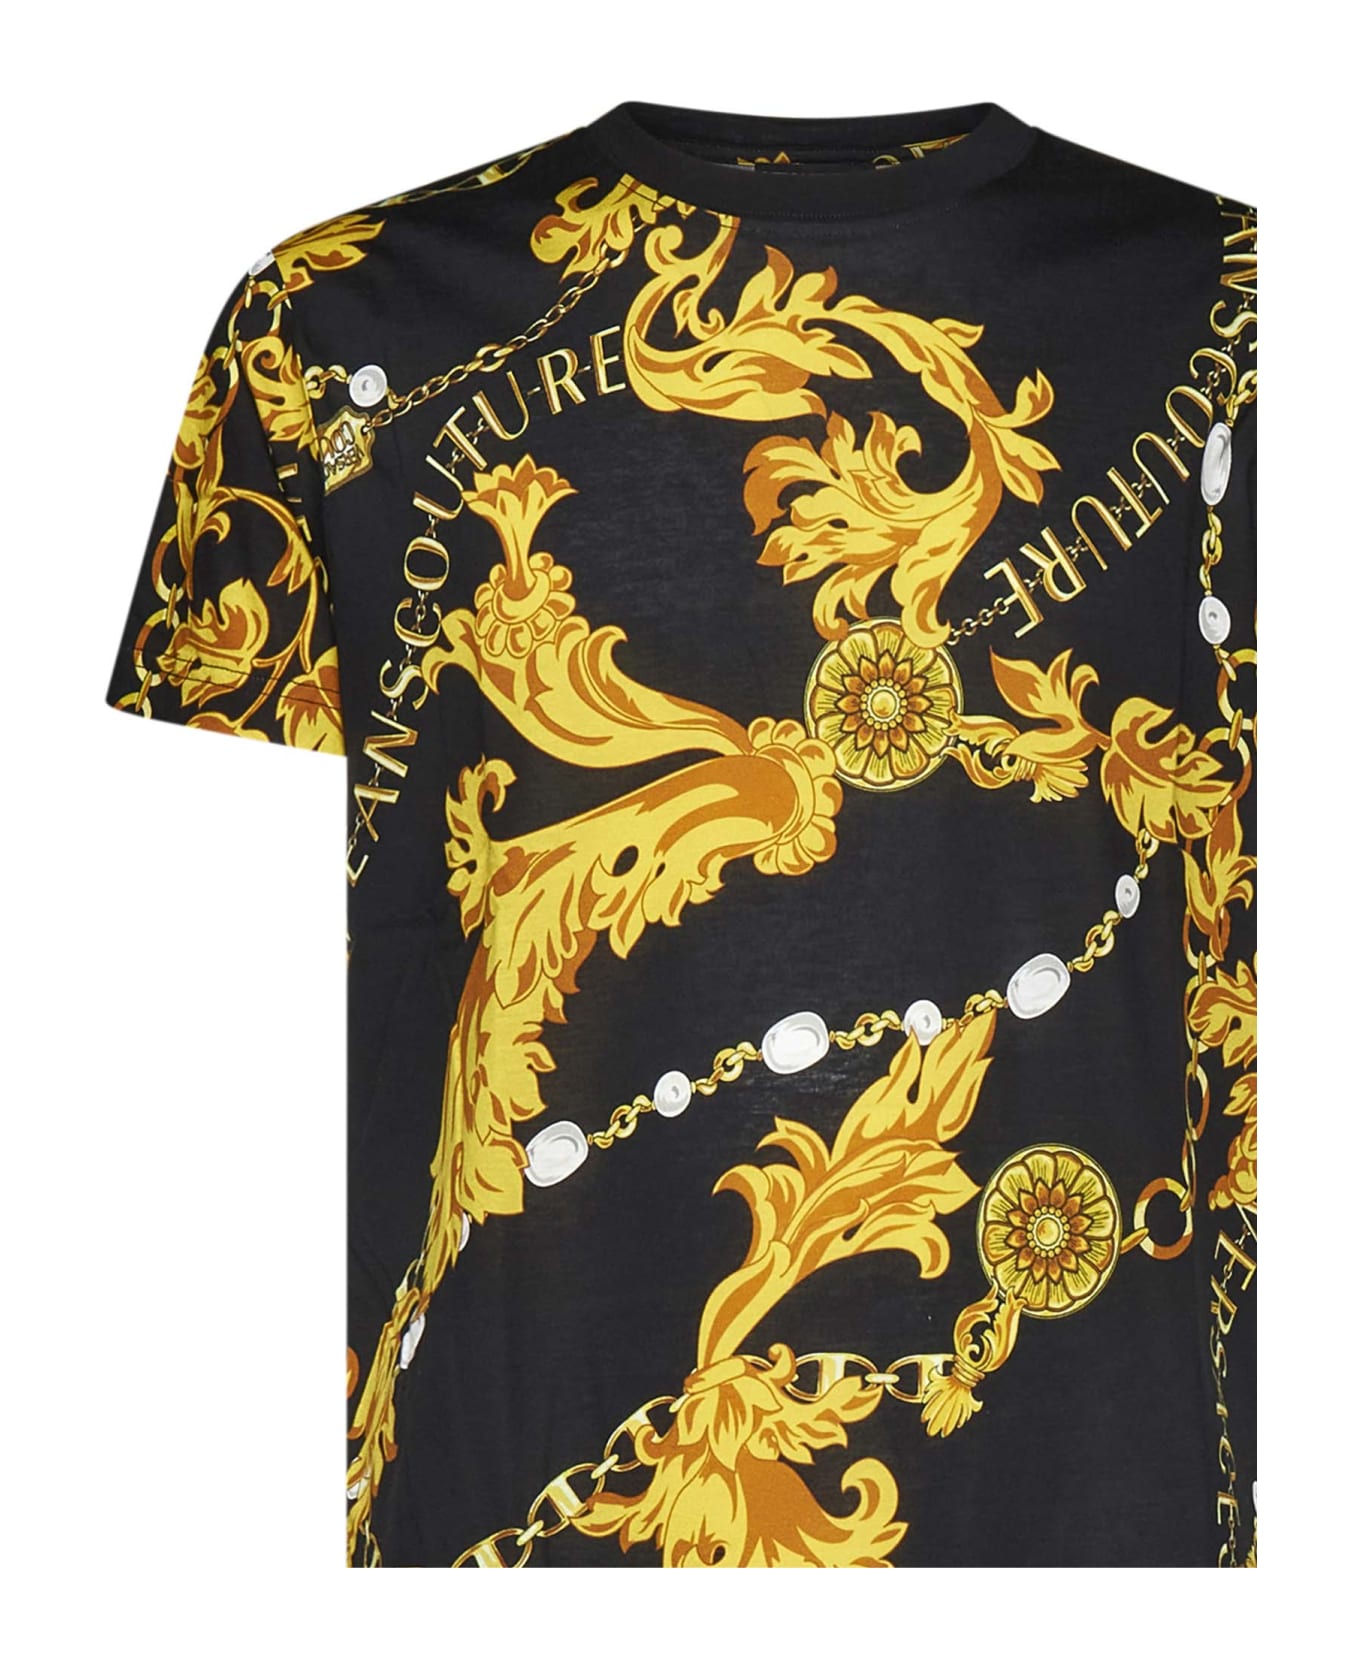 Versace Jeans Couture Chain Couture Print T-shirt - Black シャツ